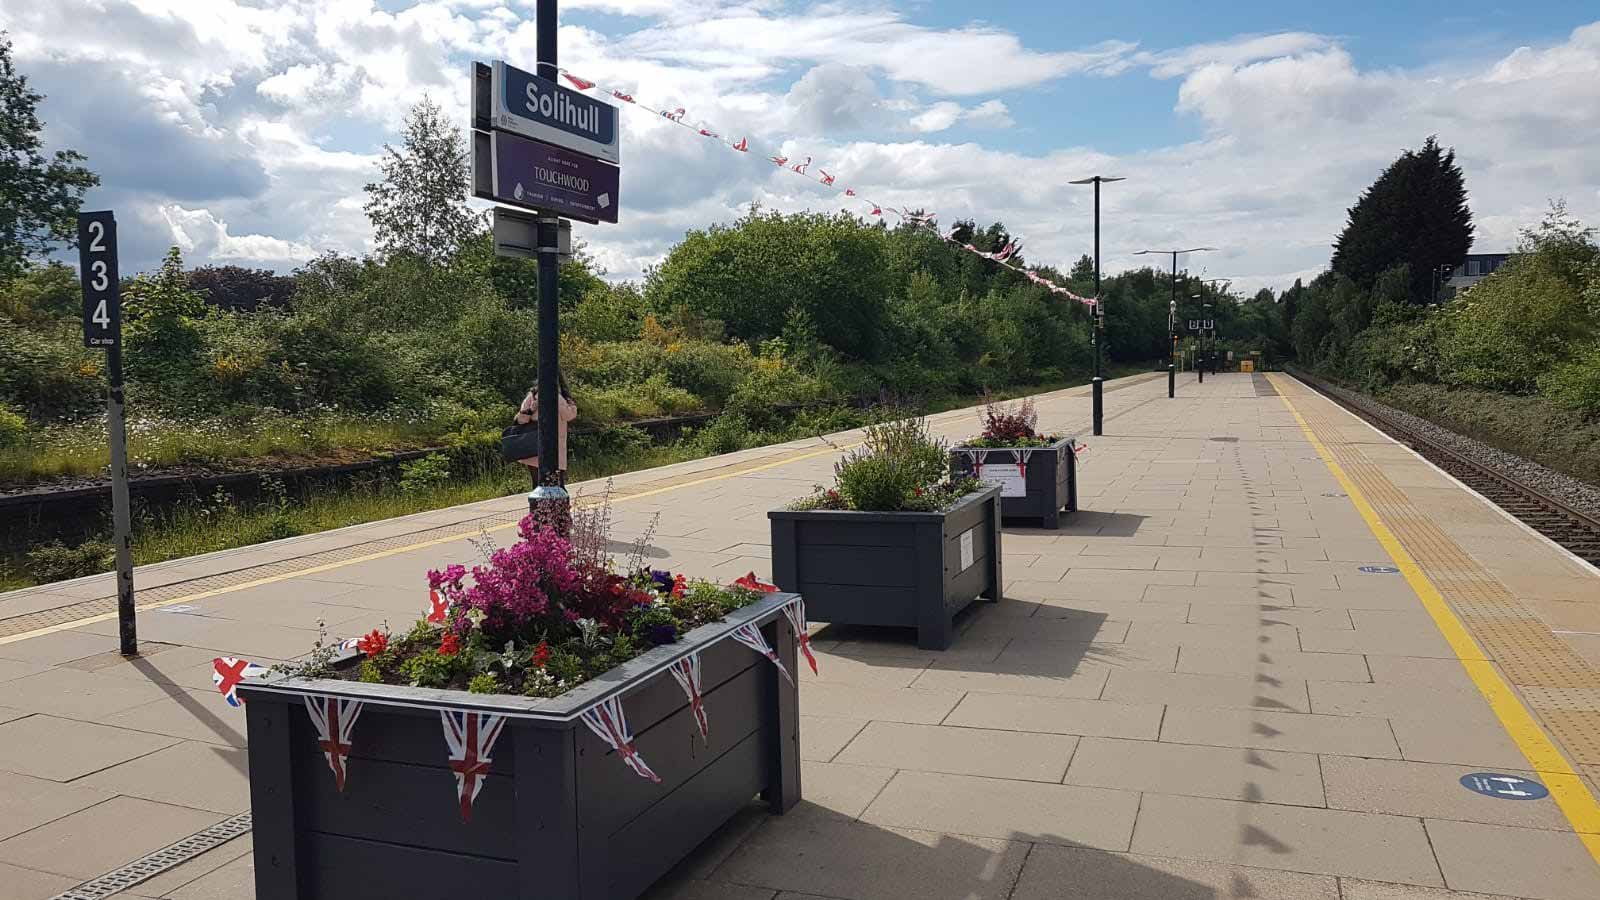 Solihull station with flower beds and Jubilee decoration